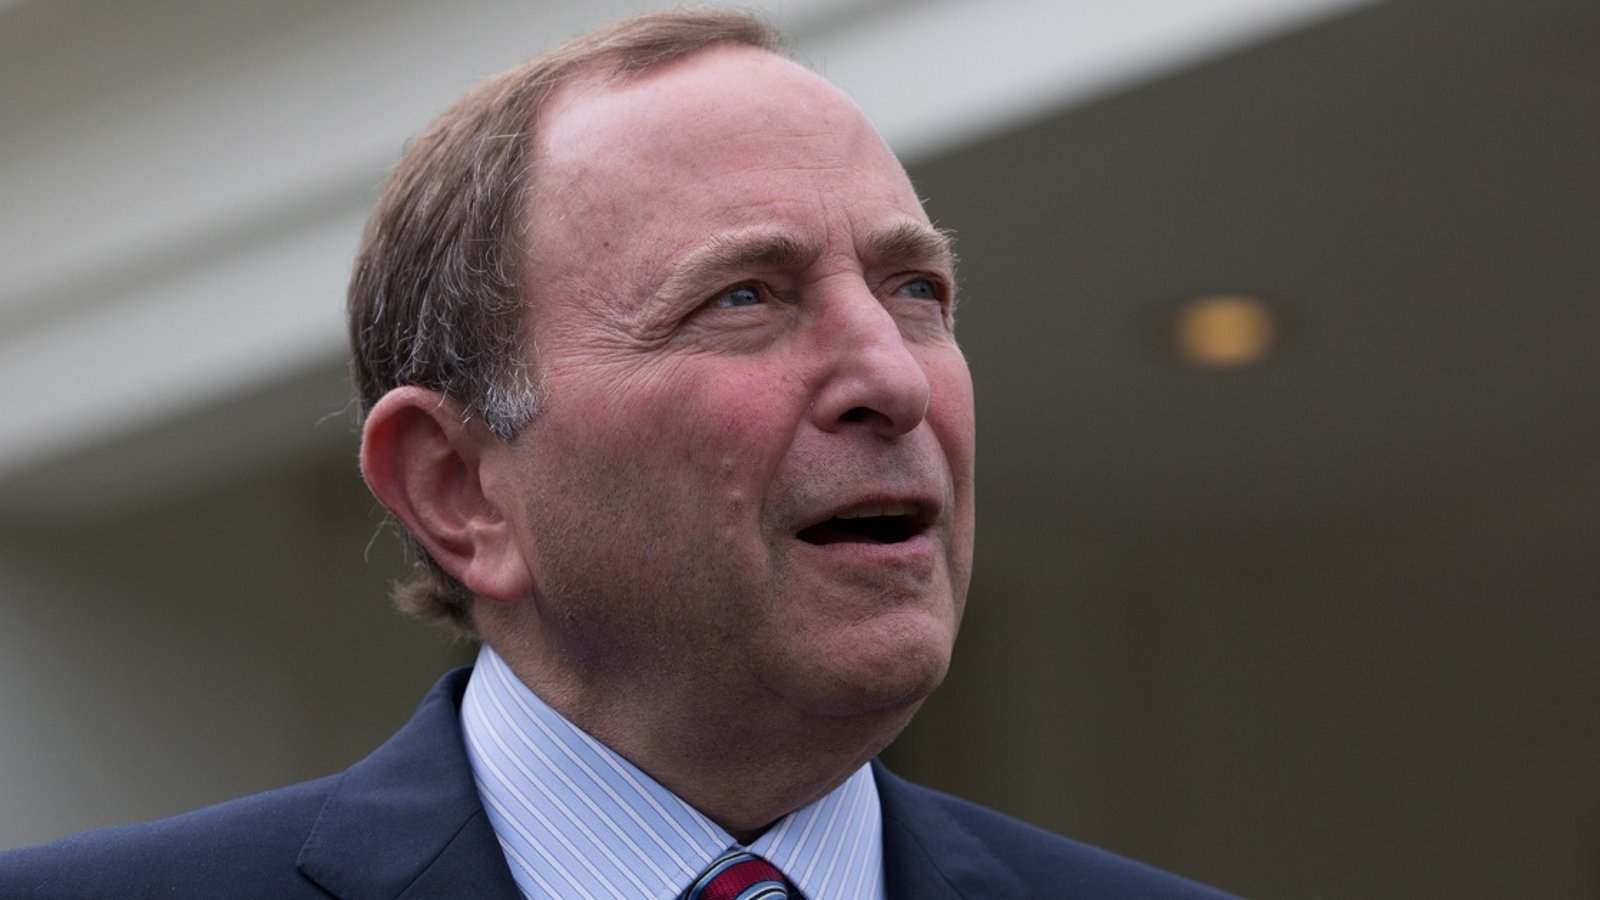 Bettman hints at bringing back highly controversial change to the NHL.